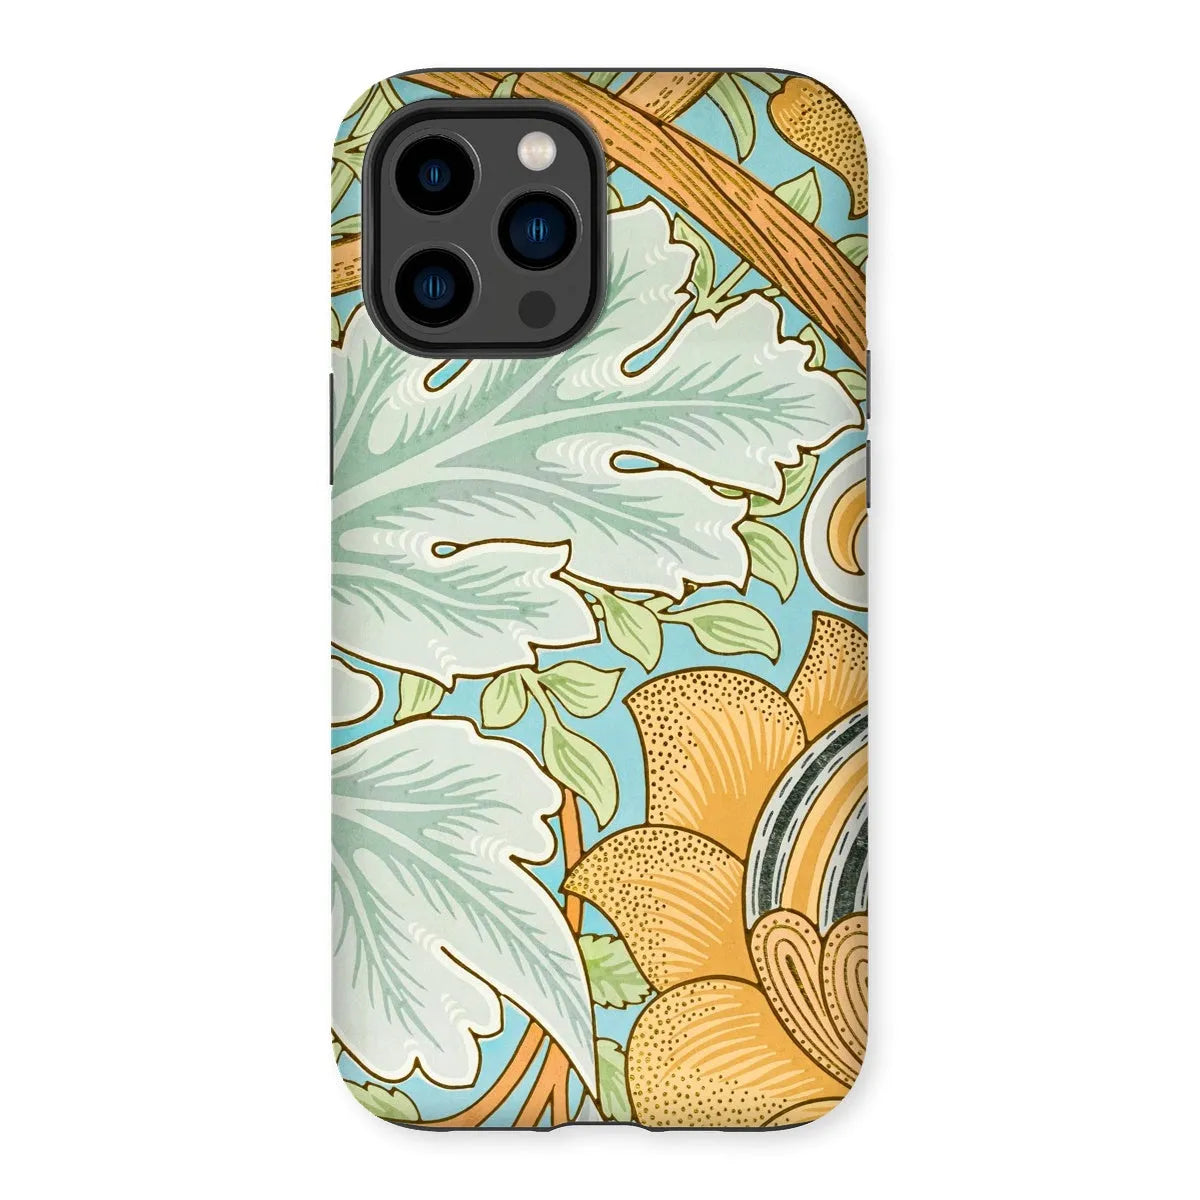 St. James - Arts And Crafts Phone Case - William Morris - Iphone 14 Pro Max / Matte - Mobile Phone Cases - Aesthetic Art